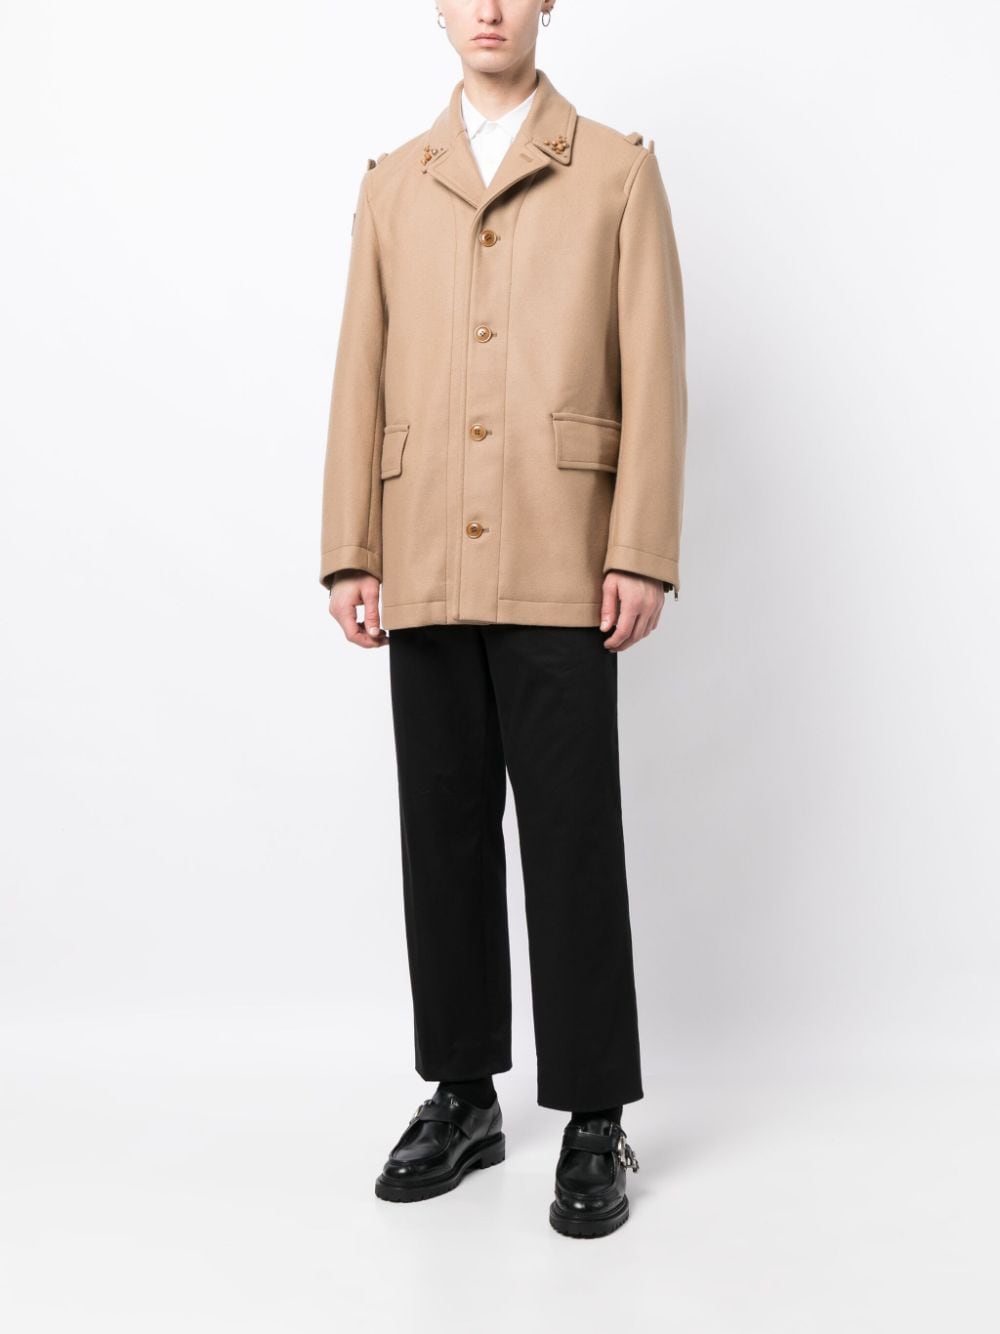 Undercover notched-collar wool blend jacket - Bruin